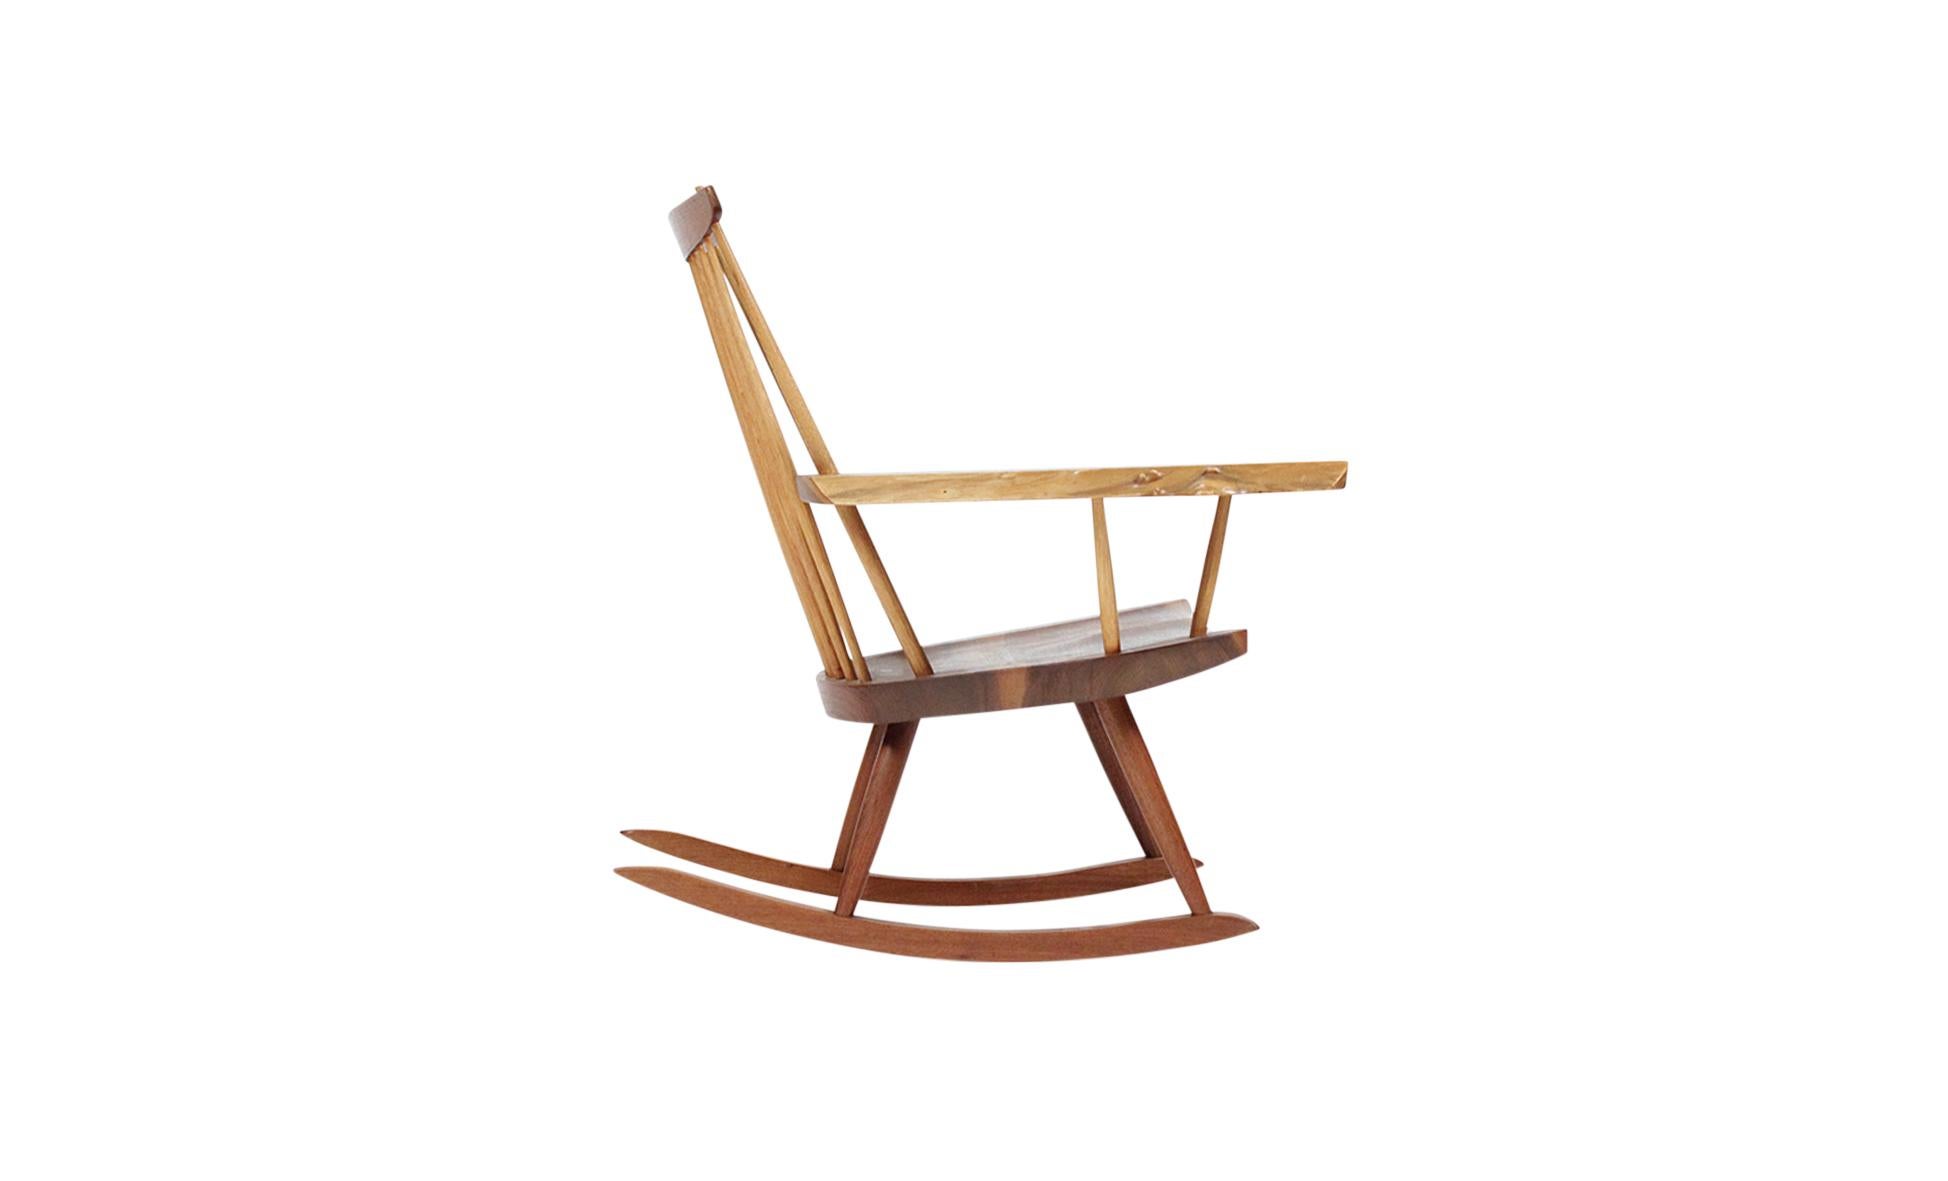 Iconic single arm rocker by George Nakashima. Executed in walnut with hickory spindles. Large expressive right arm. Chair is signed and dated and comes with complete provenance.
  